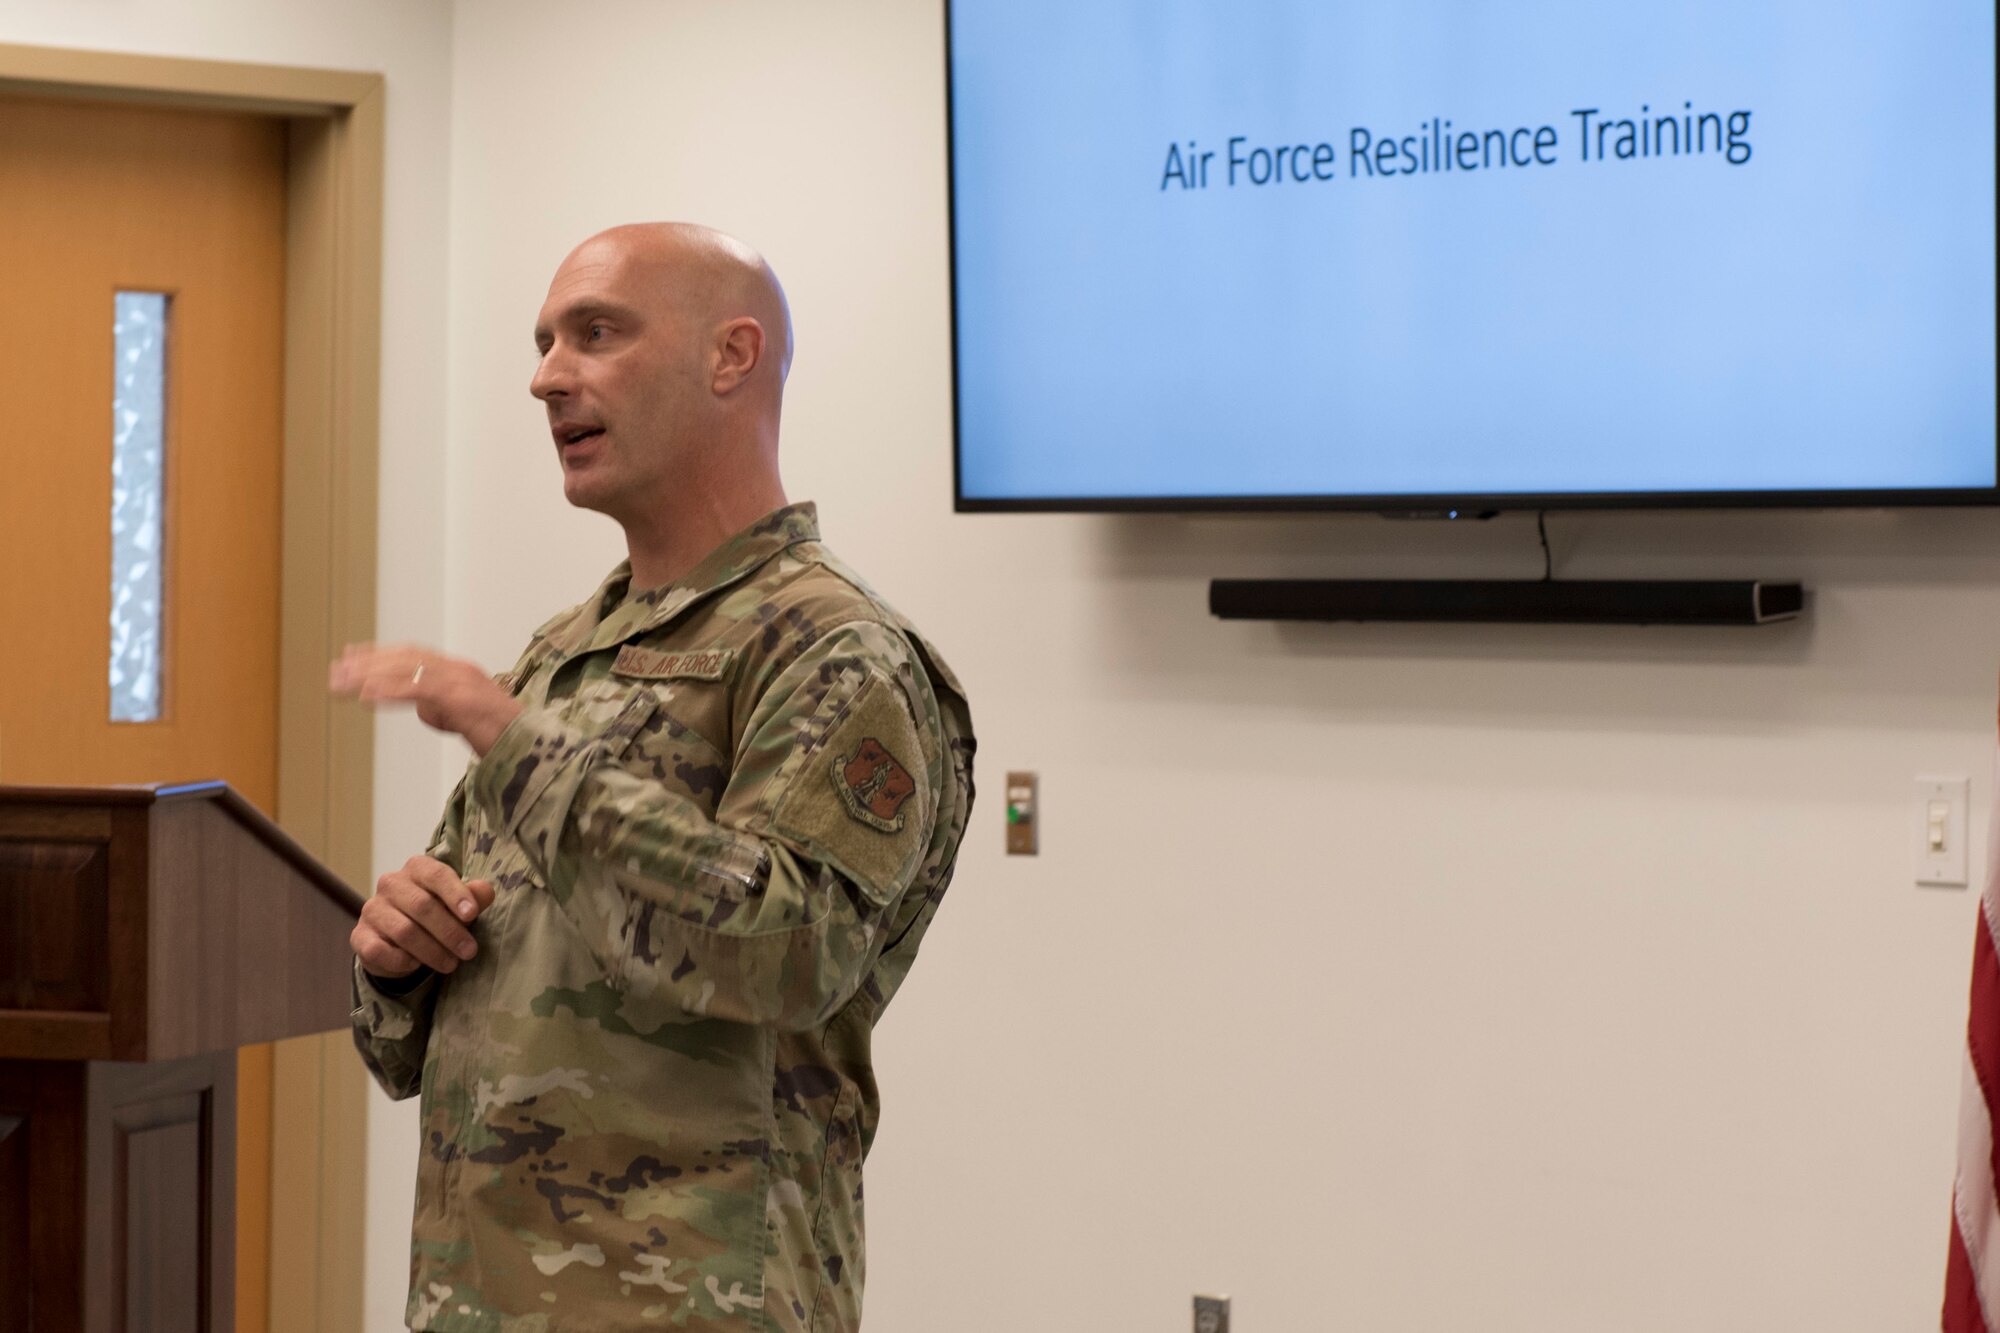 Master resilience trainer, Master Sgt. Anthony Faiono, discusses resiliency with Airmen during the 167th Airlift Wing's Full Spectrum Wellness Day, Oct. 6, 2019. The 167th Airlift Wing paused normal unit training assembly activities for the day to focus on wellness and resilience as part of an Air Force-wide initiative to address a spike in suicides across the force this year. (U.S. Air National Guard photo by Senior Master Sgt. Emily Beightol-Deyerle)